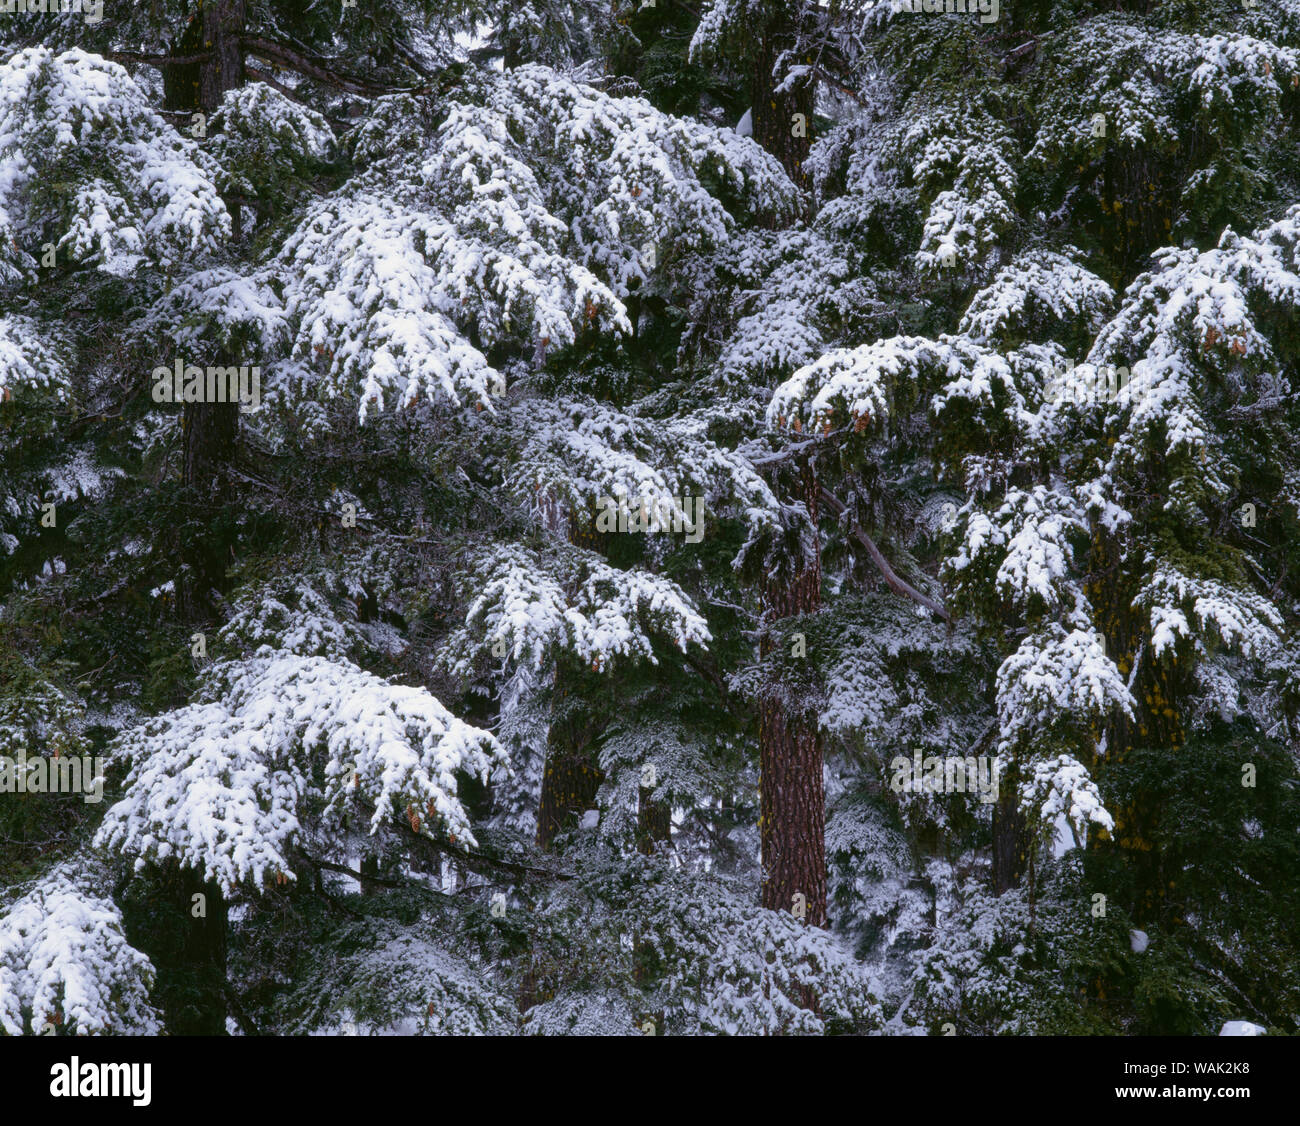 USA, Oregon, Crater Lake National Park. Winter snow clings to mountain hemlock trees. Stock Photo